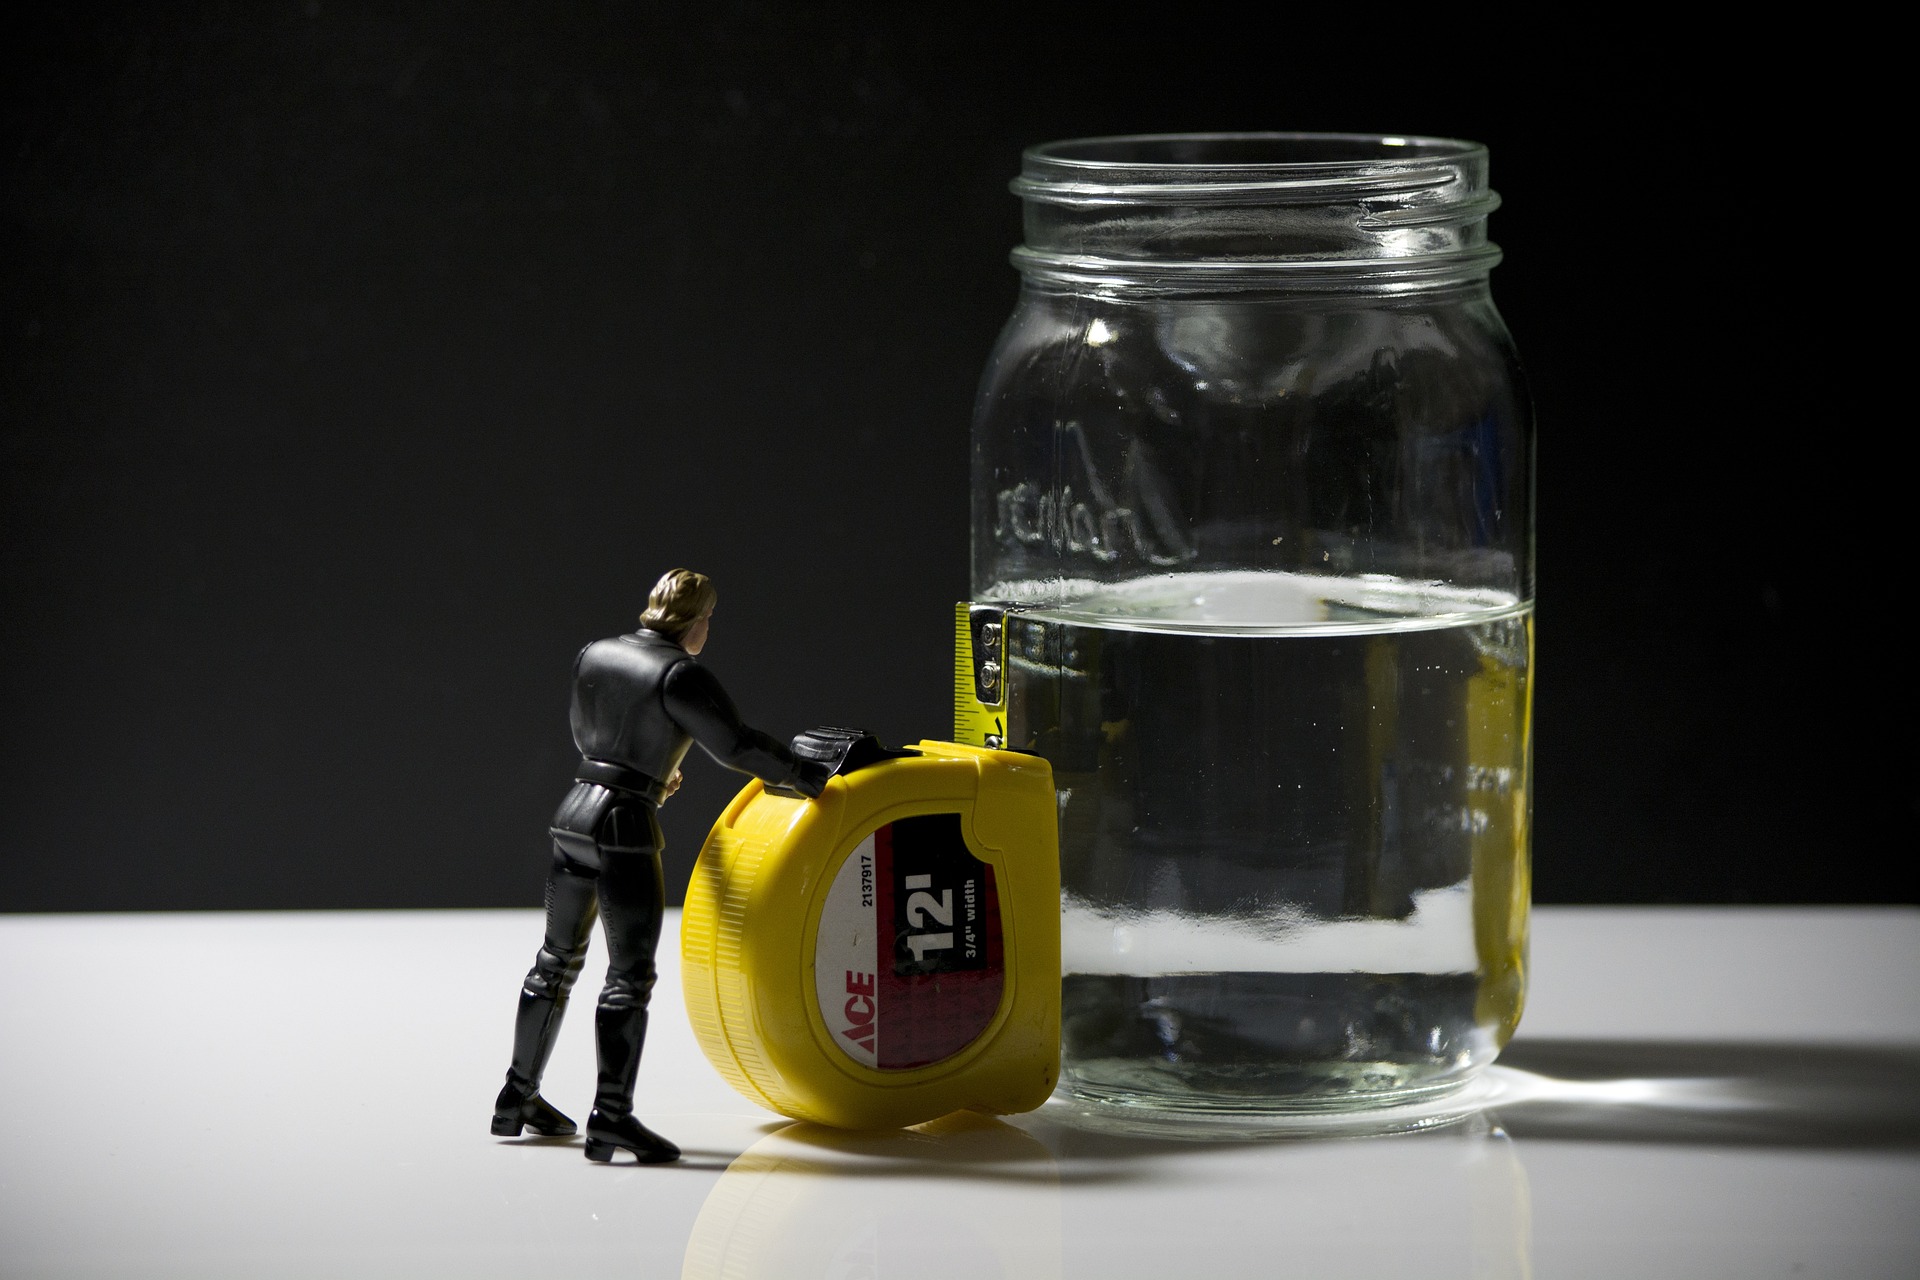 A toy figure assessing the level of water in a mason jar using a tape measurer.